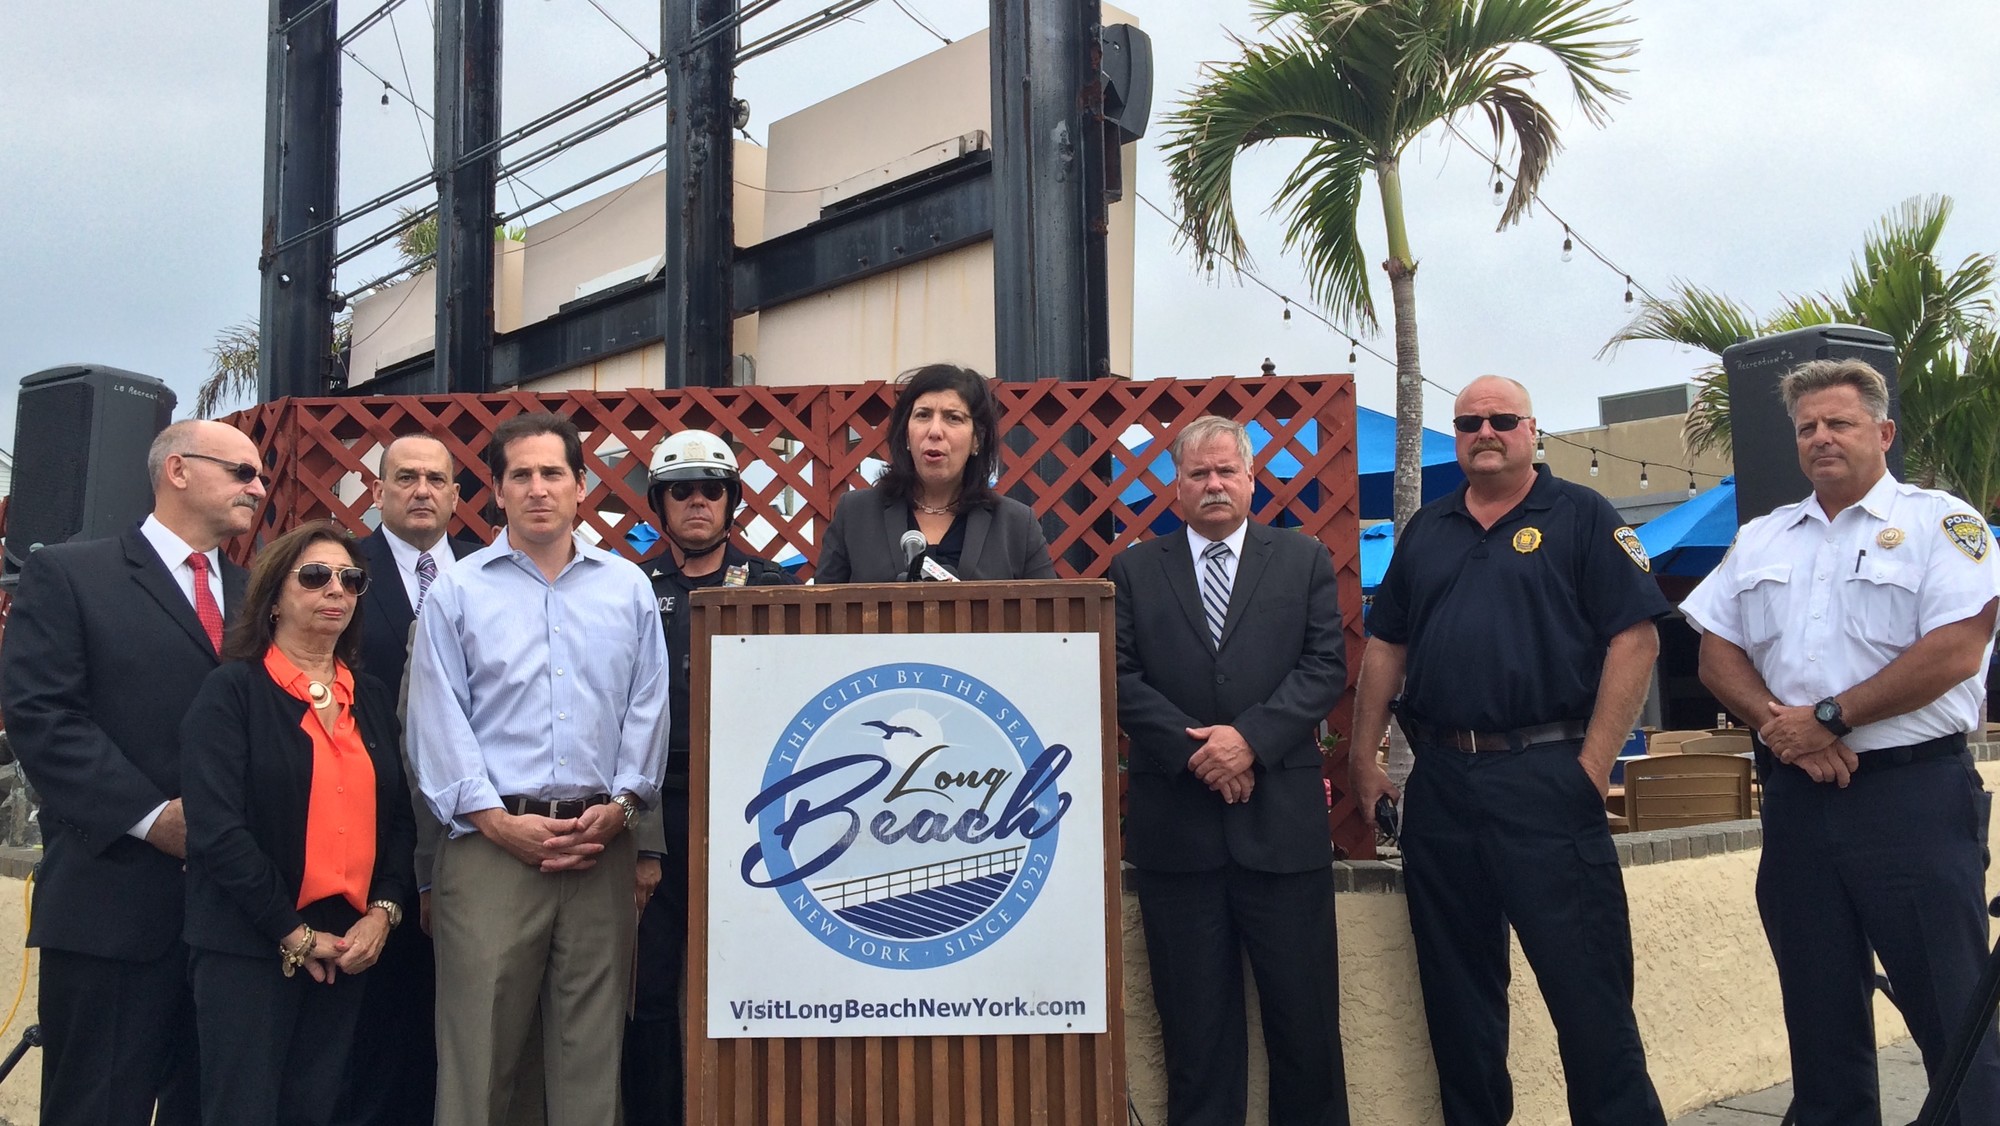 Acting District Attorney Madeline SIngas and local officials held a press conference in Long Beach on Friday announced an enhanced drunk driving enforcement program that will go into effect in the city this holiday weekend.